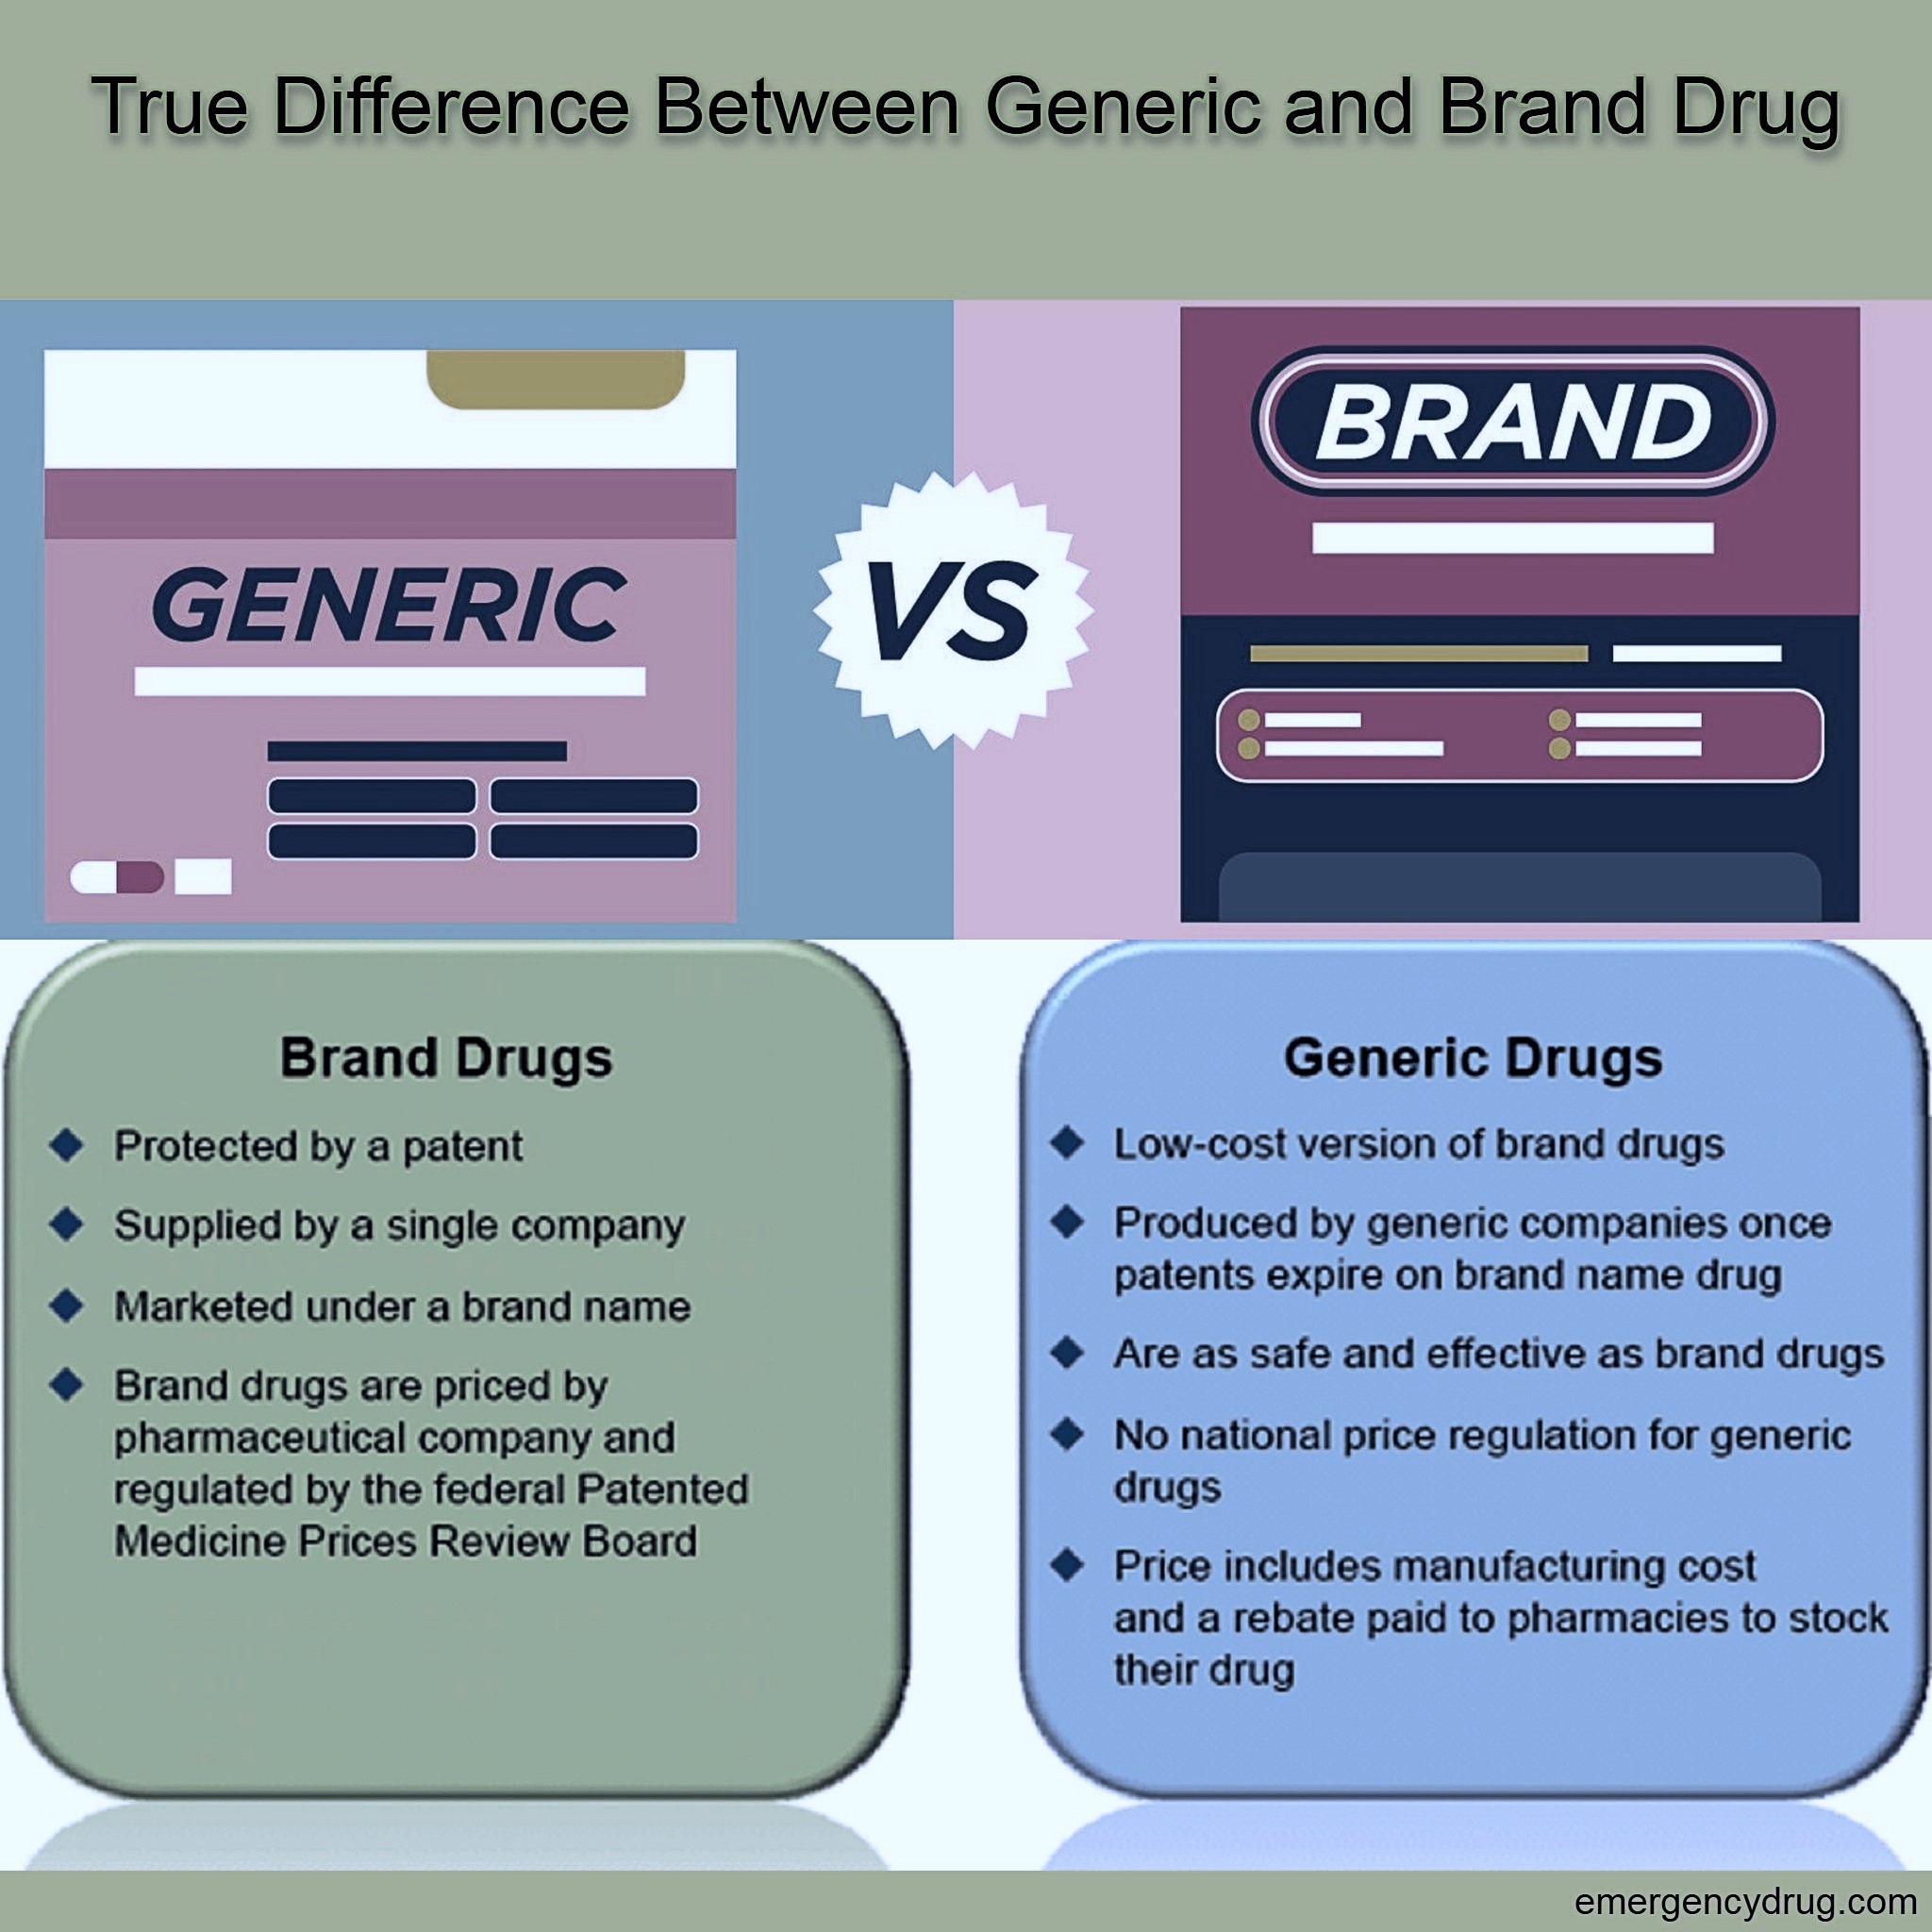 True Difference Between Generic and Brand Drug - Emergency Drug